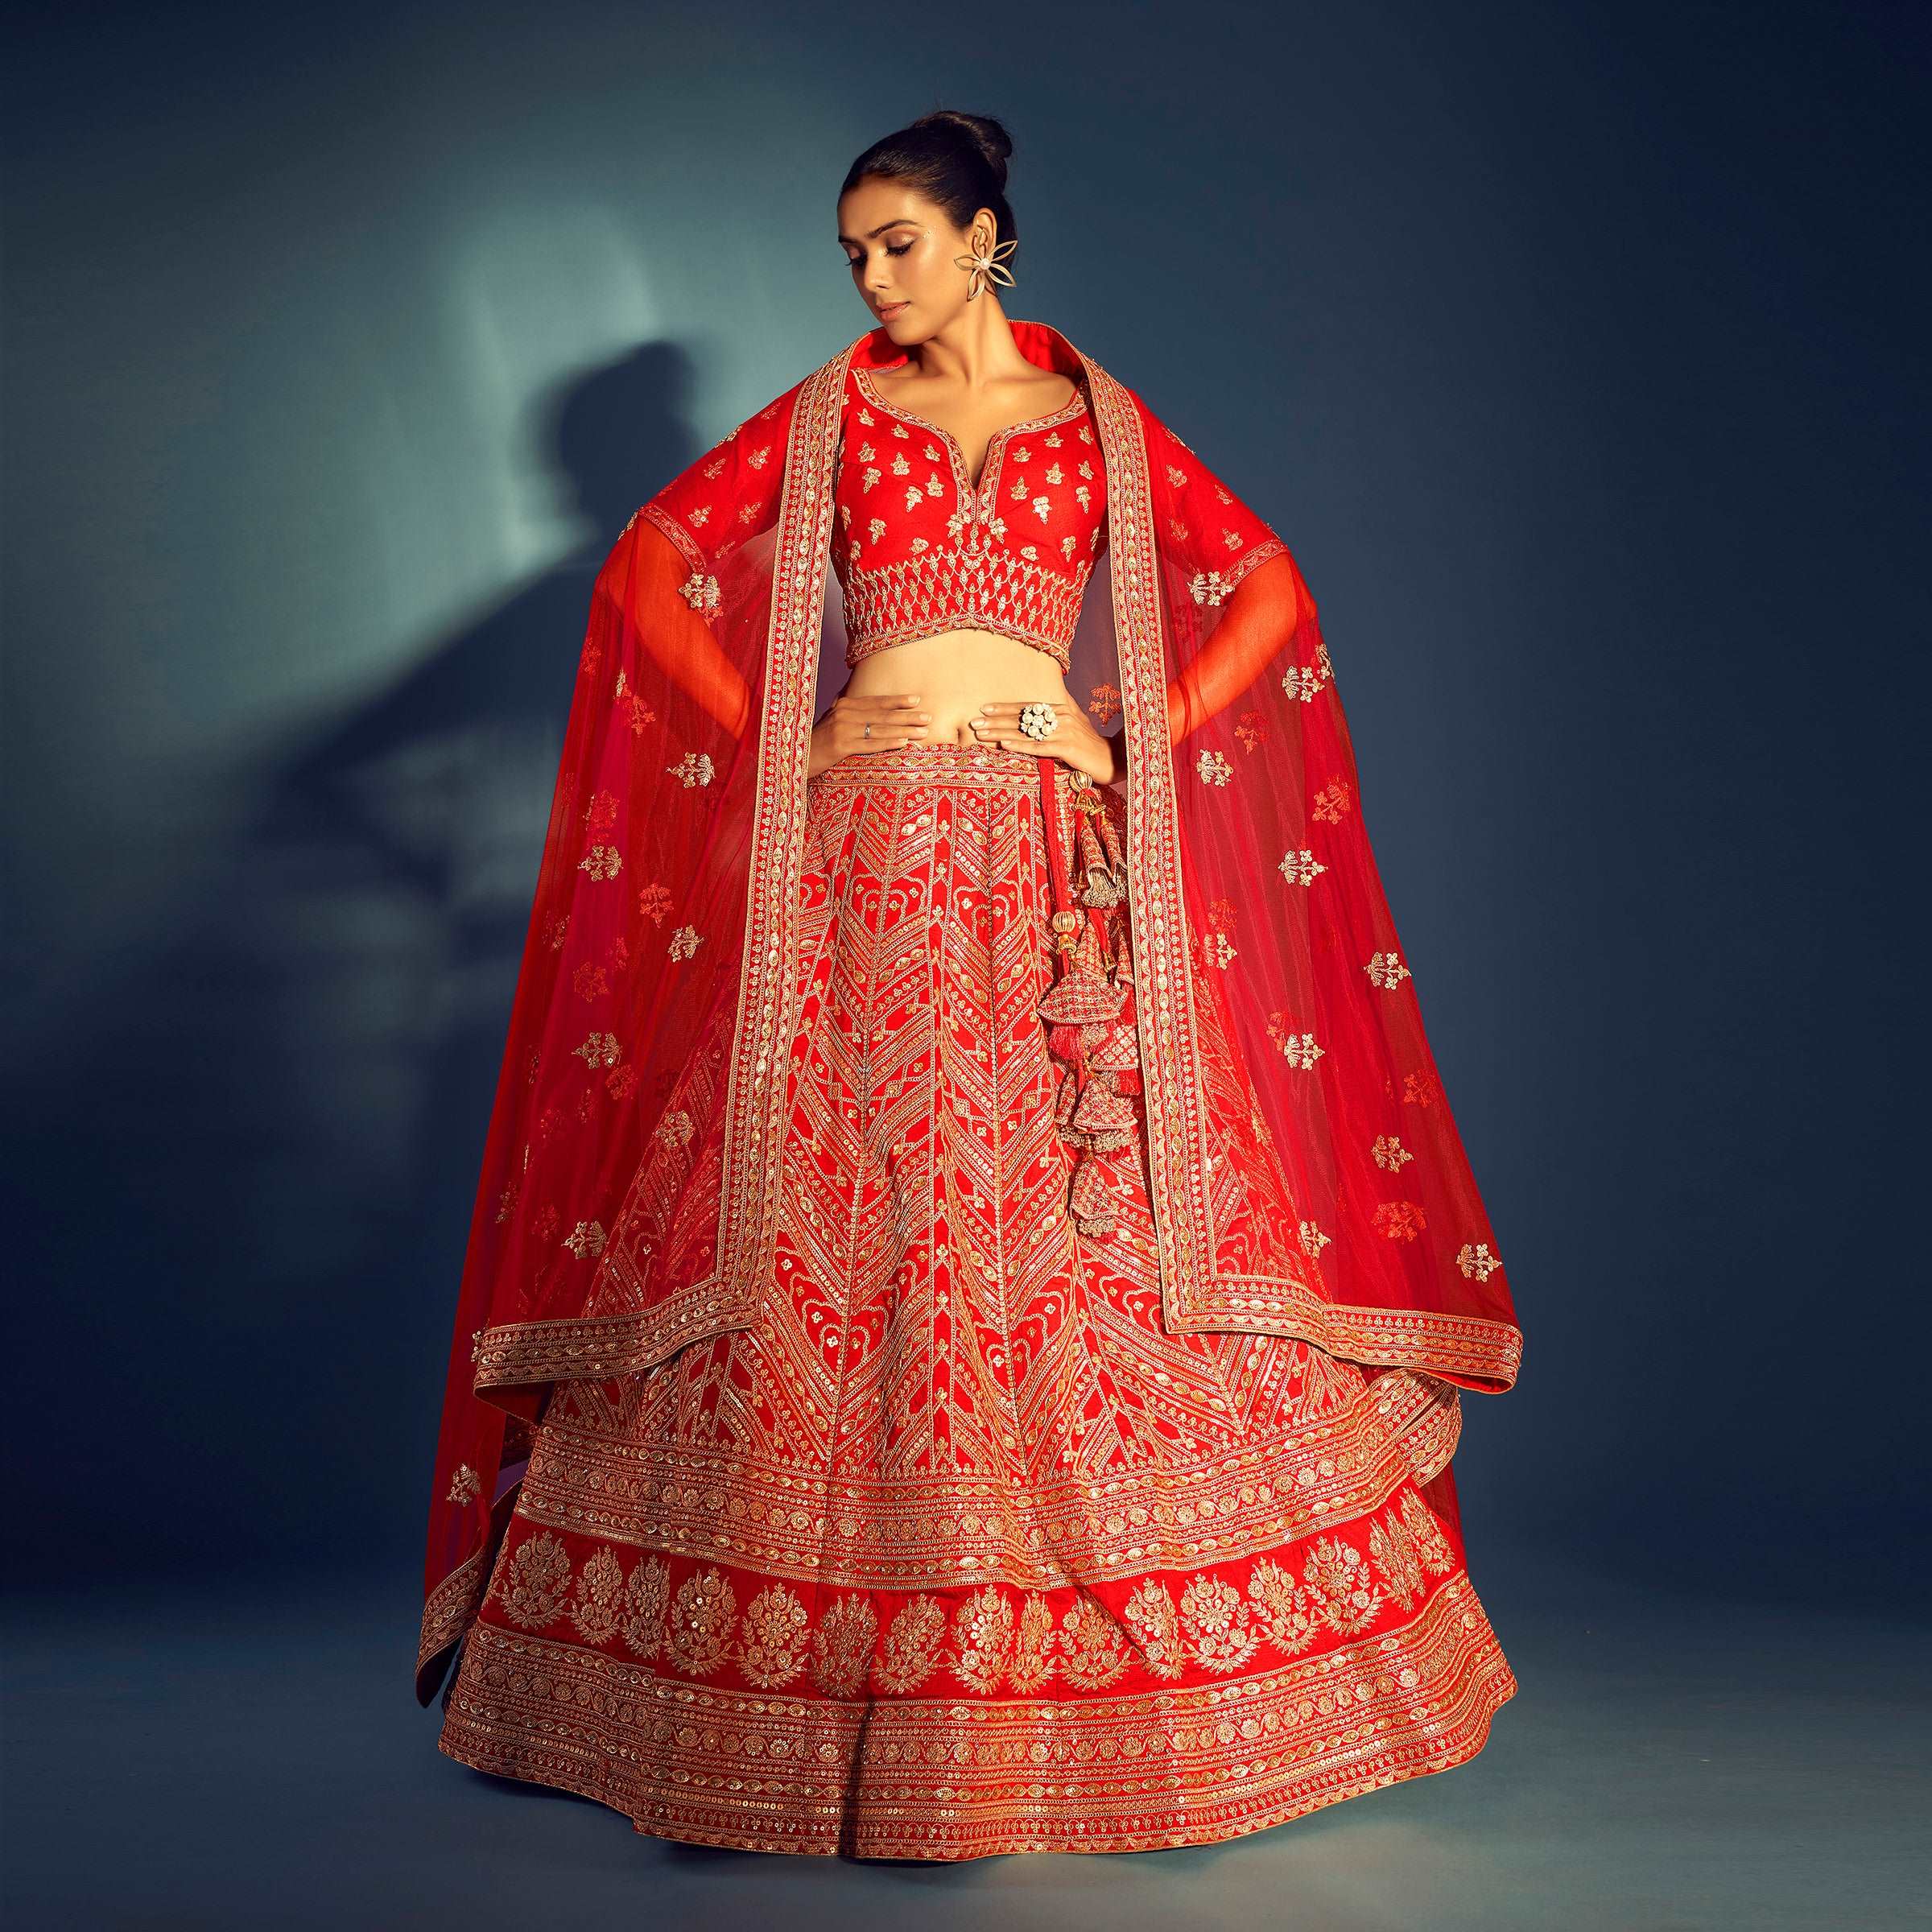 Be a Sabyasachi bride in the most unique lehengas we found on Instagram